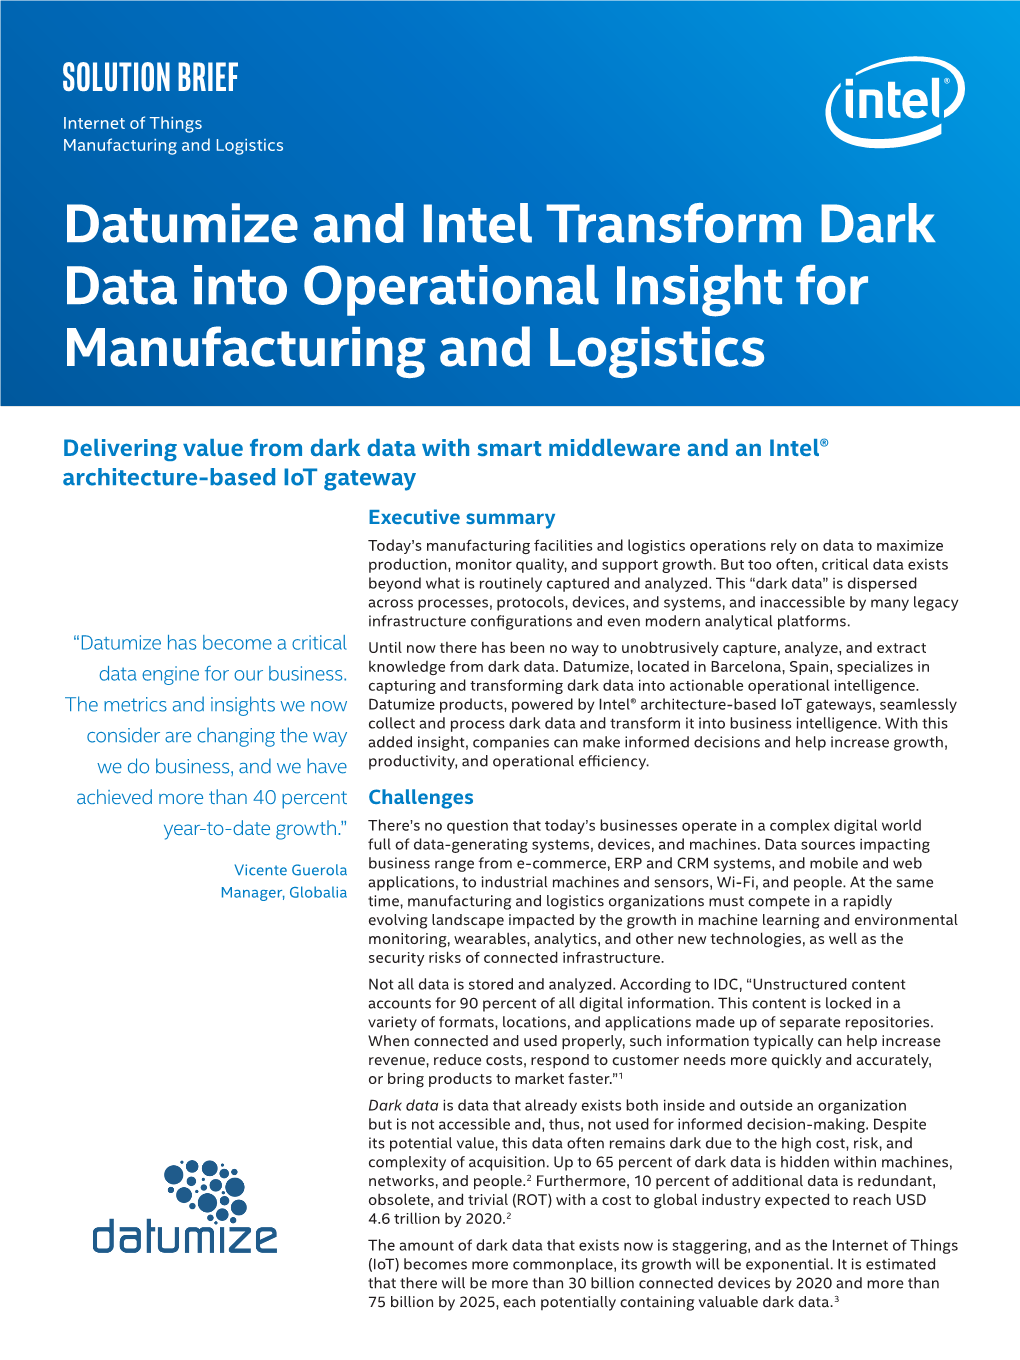 Transforming Dark Data in Manufacturing Into Operational Insight